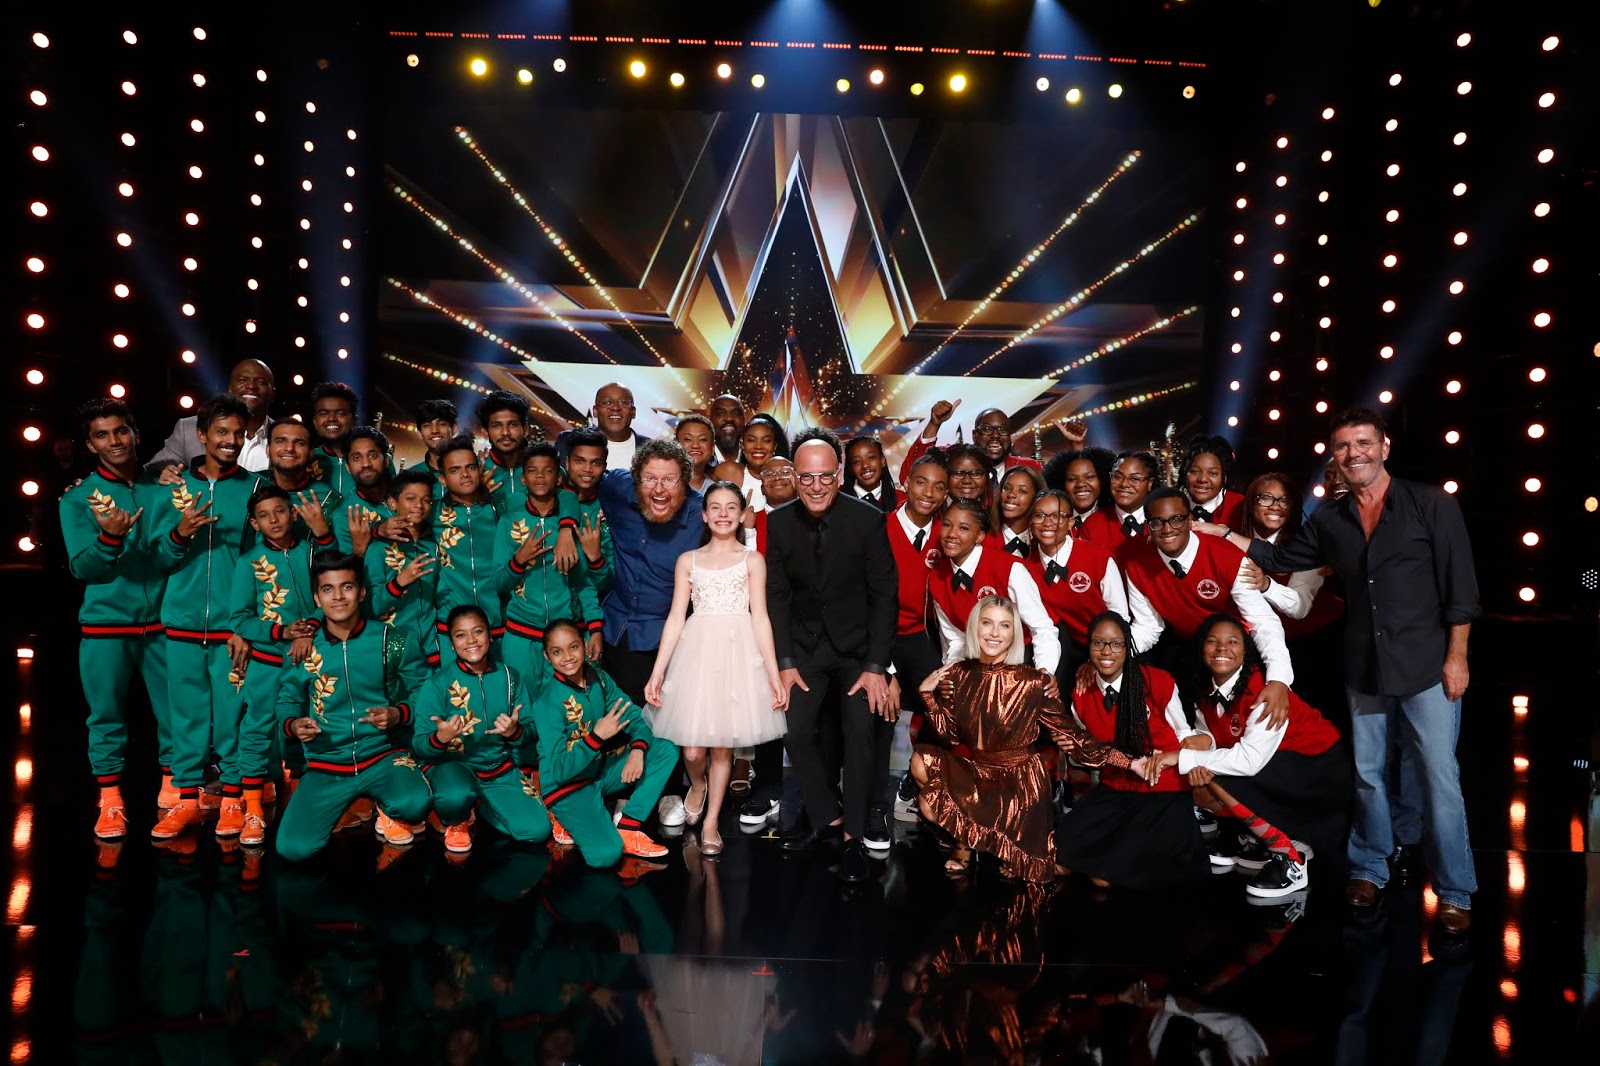 'America's Got Talent' Meet The Top 10 Acts Going Into The Finals